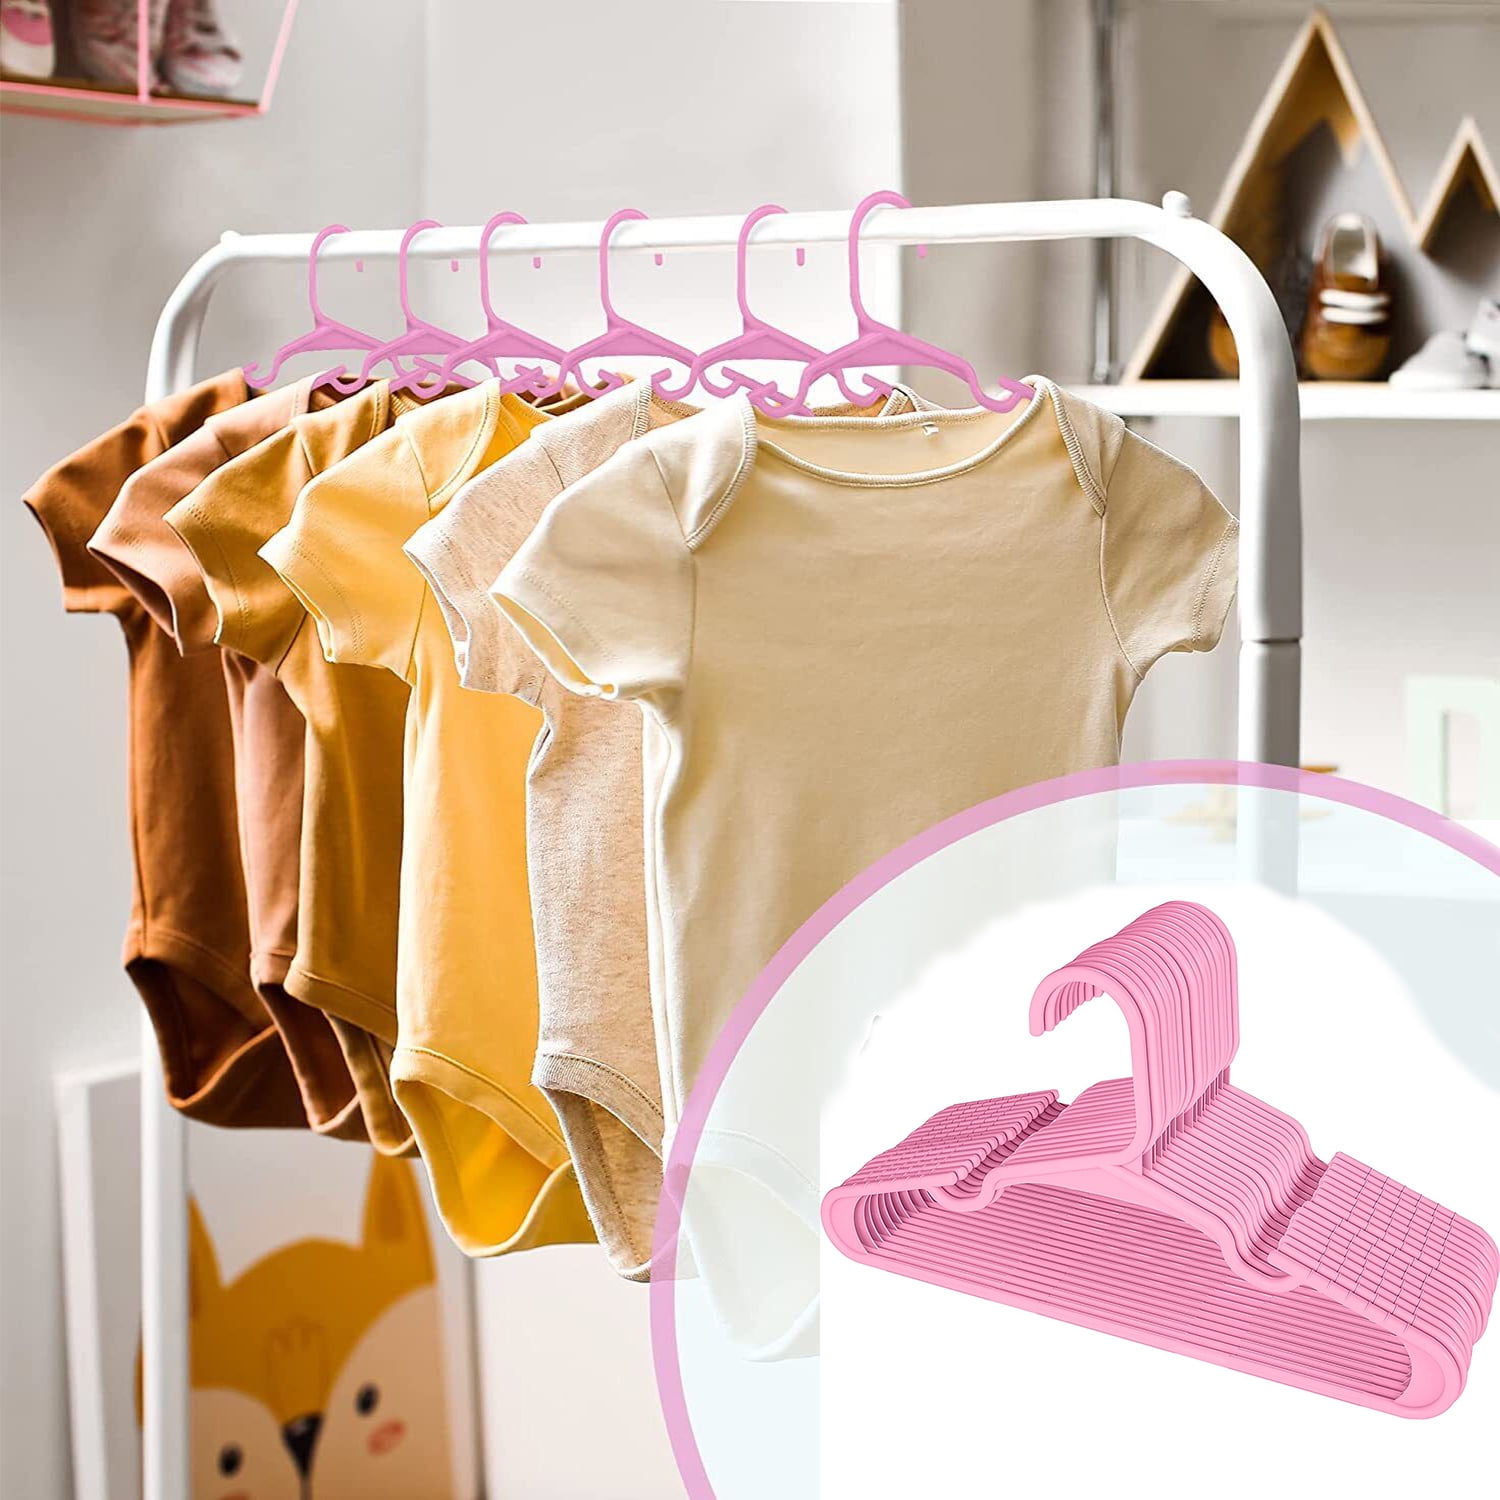 Malikesy 10pcs Baby Hangers for Clothes, Ultra Thin Baby Hangers Newborn,  Multicolored Toddler Clothes Hangers, Nursery Hangers for Baby